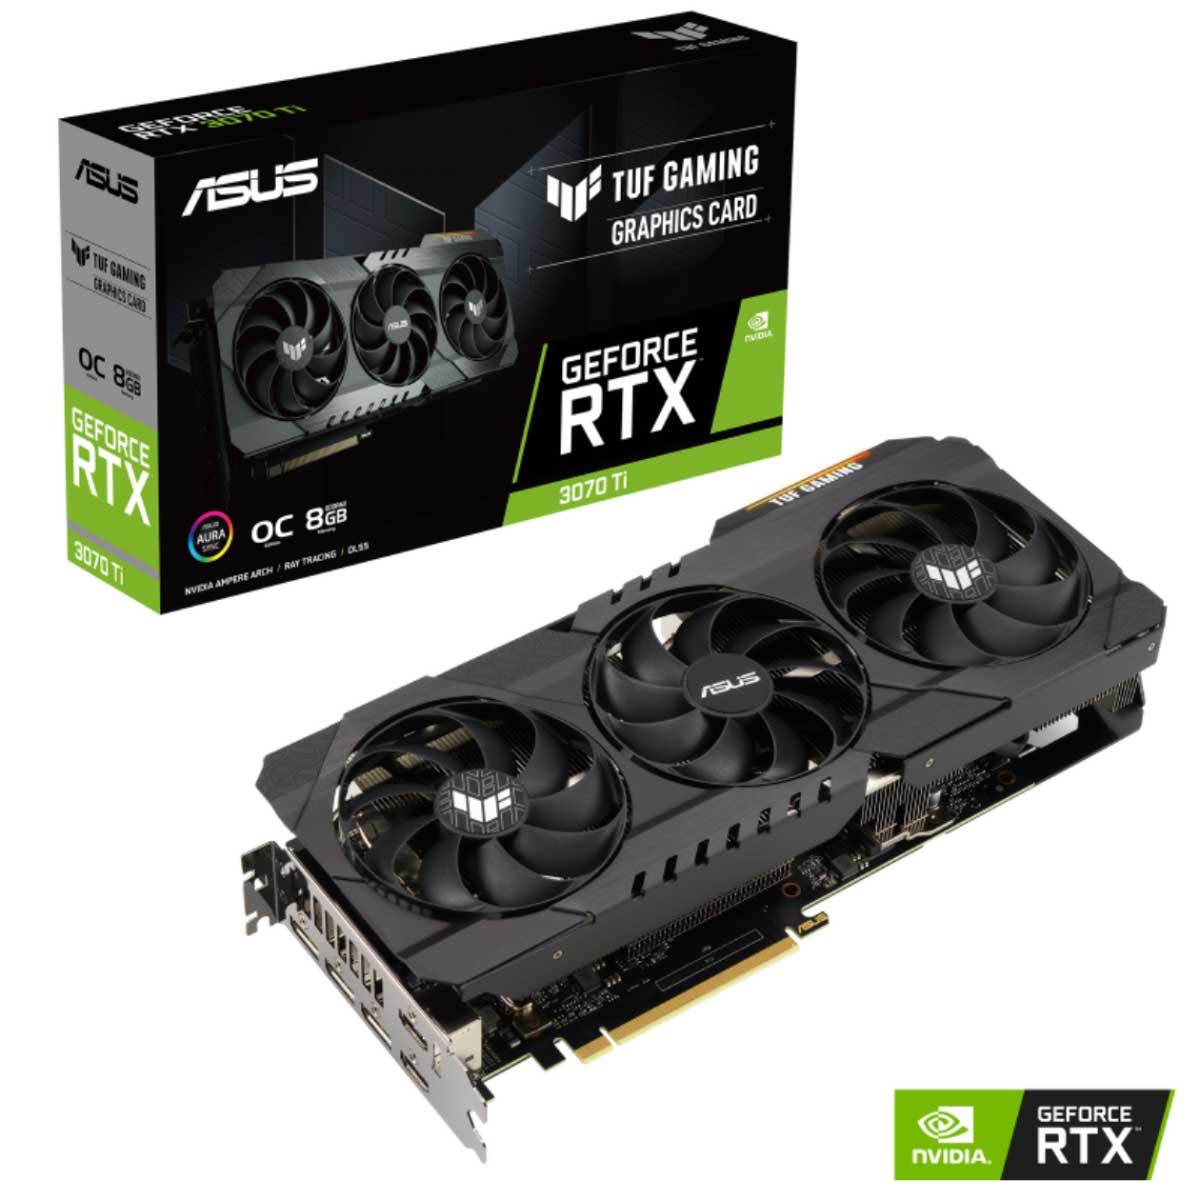 Une ASUS RTX 3070 Ti TUF O8G-GAMING à seulement 799,99 euros !